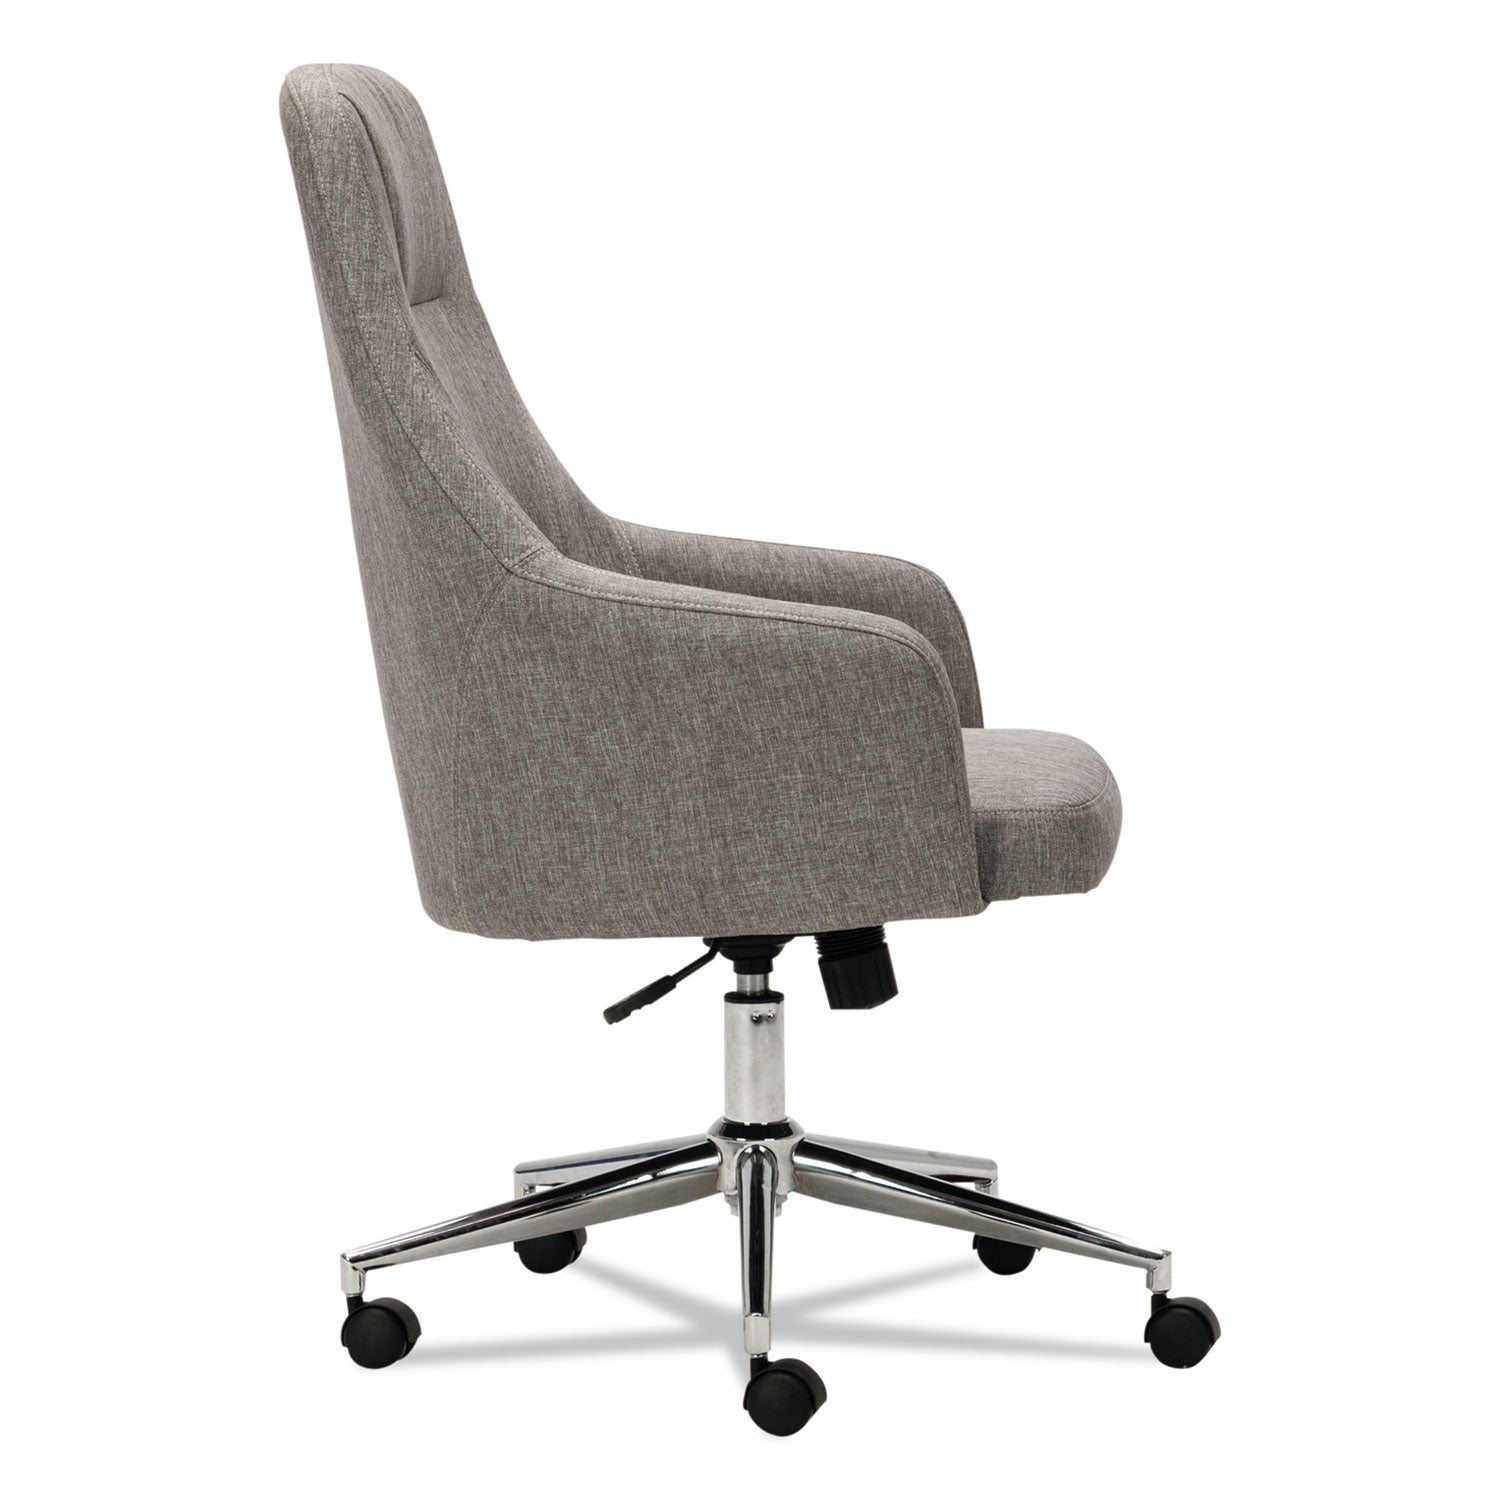 alera-captain-series-high-back-chair-supports-up-to-275-lb-171-to-201-seat-height-gray-tweed-seat-back-chrome-base_alecs4151 - 3